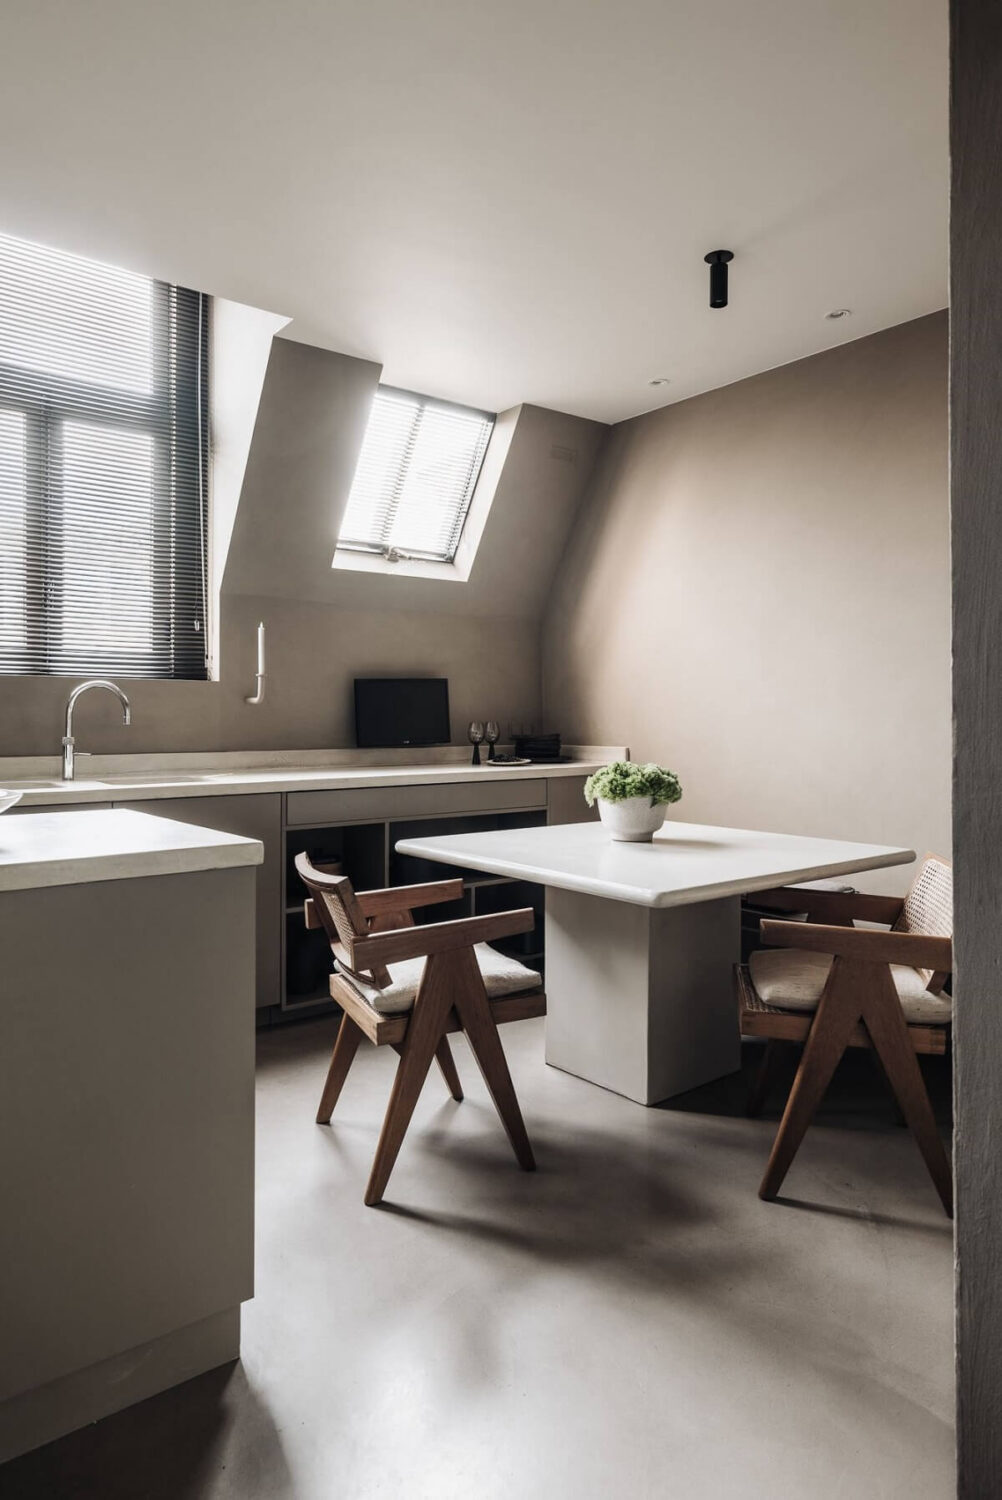 dining-area-kitchen-light-gray-design-apartment-amsterdam-nordroom